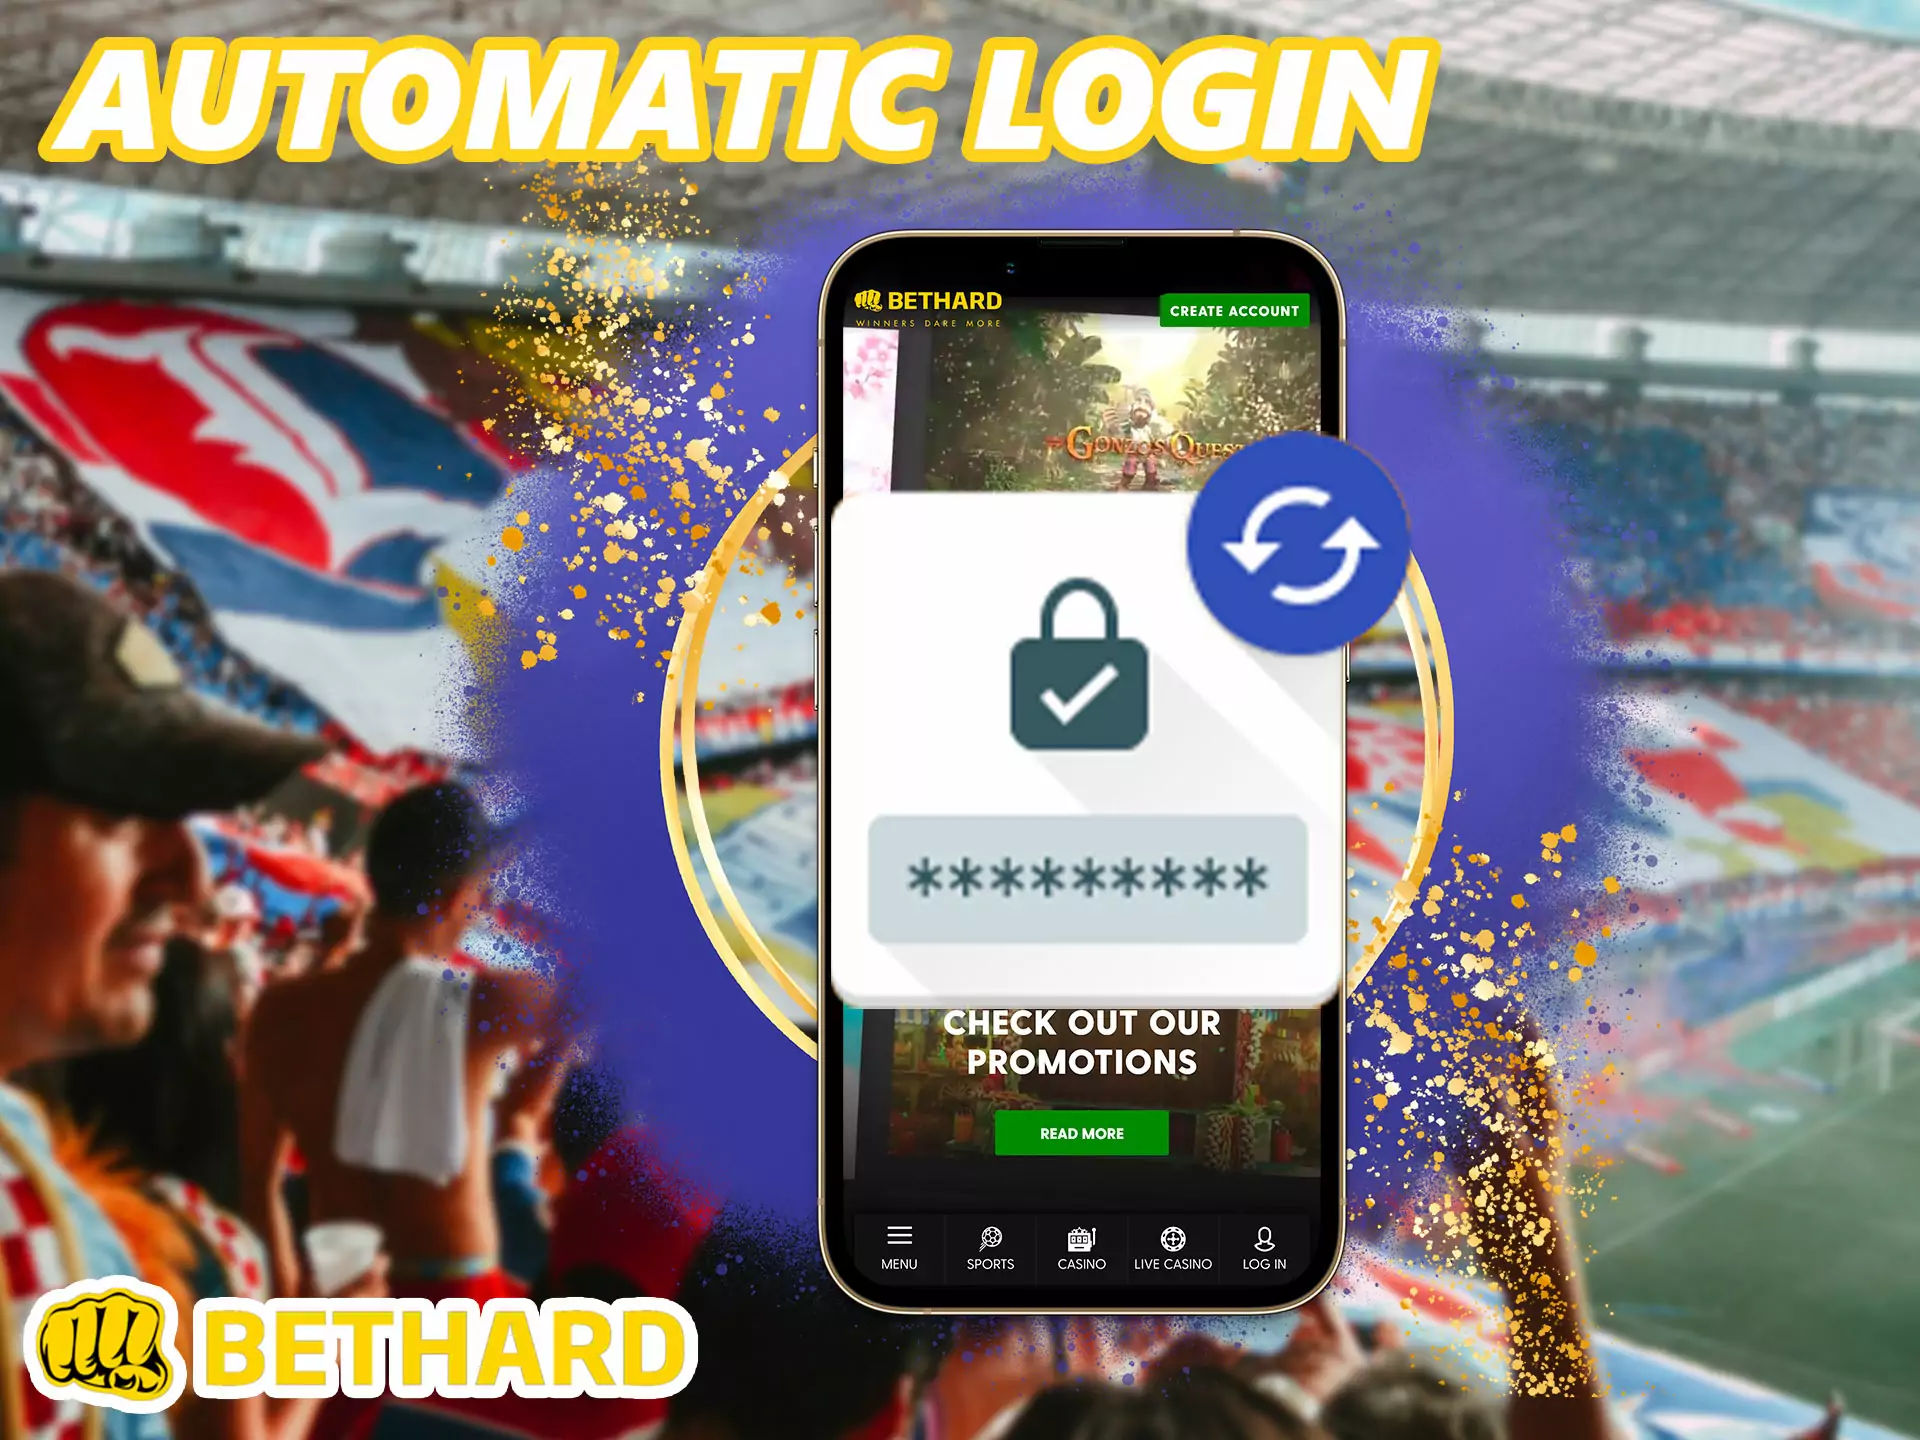 After the first login, the data will be saved and will not need to be entered the next time the application is opened, for the safety of users, the application protection system has been thought out, you can enter using your fingerprint.